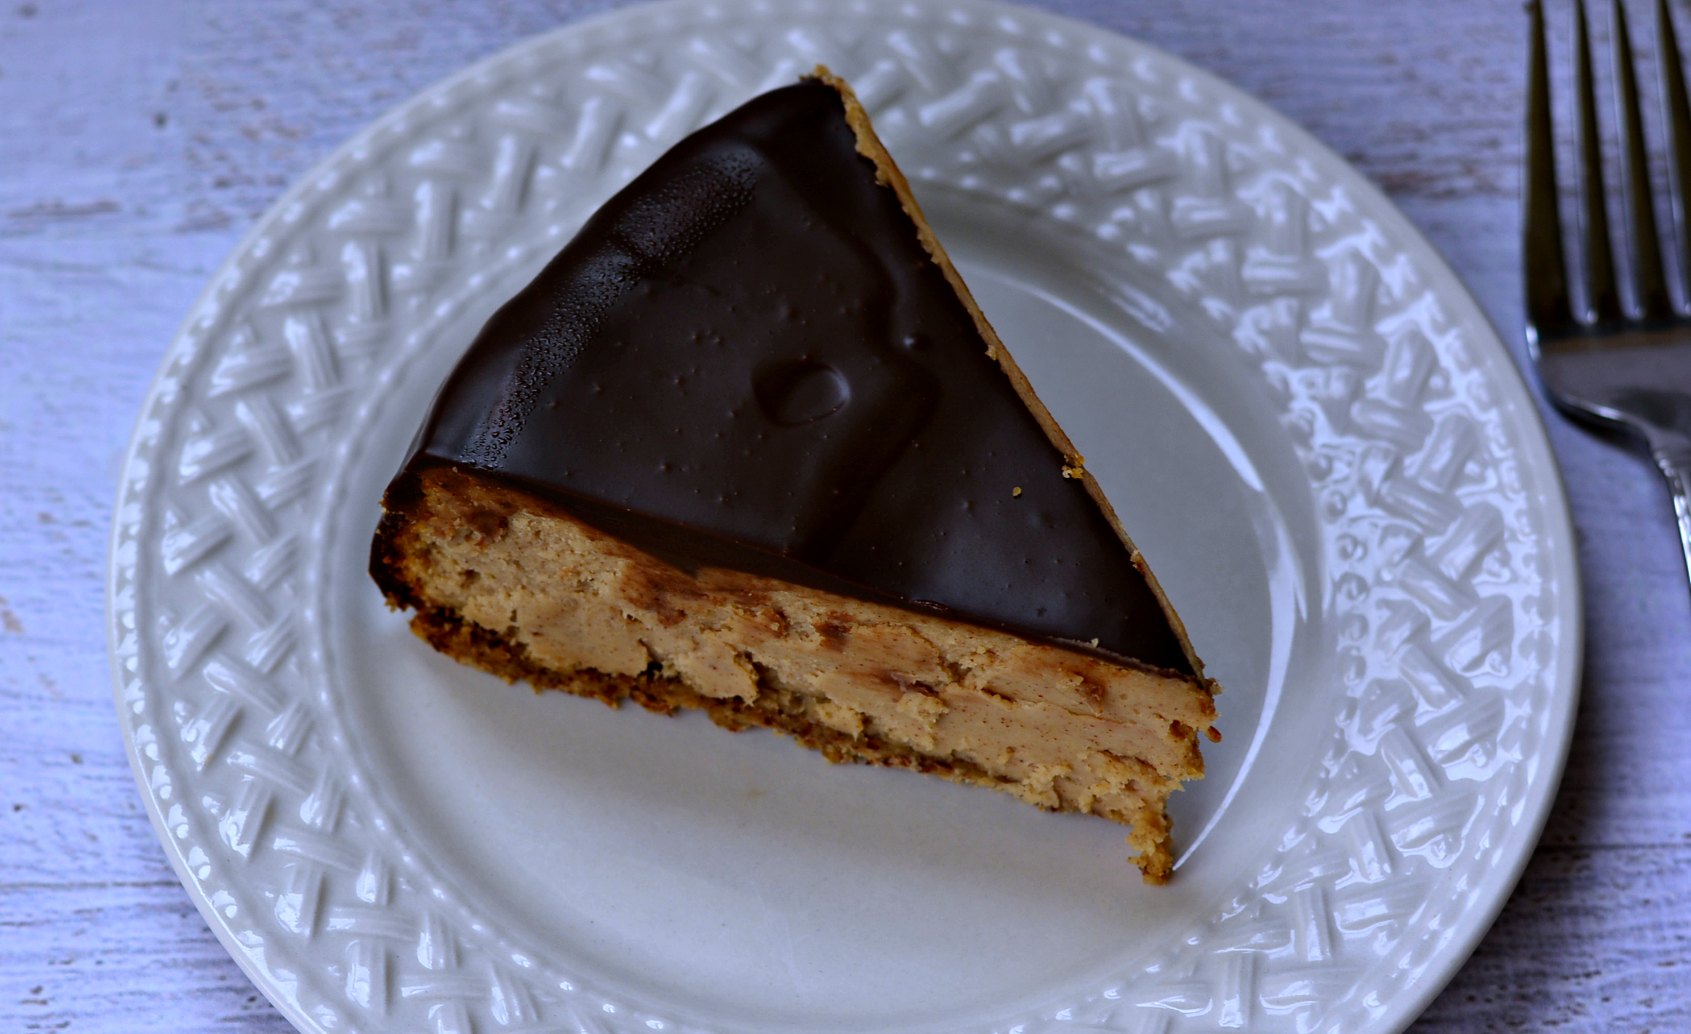 Enjoy a gluten free cheesecake made with almond butter and covered in chocolate! | GrowingUpGabel.com